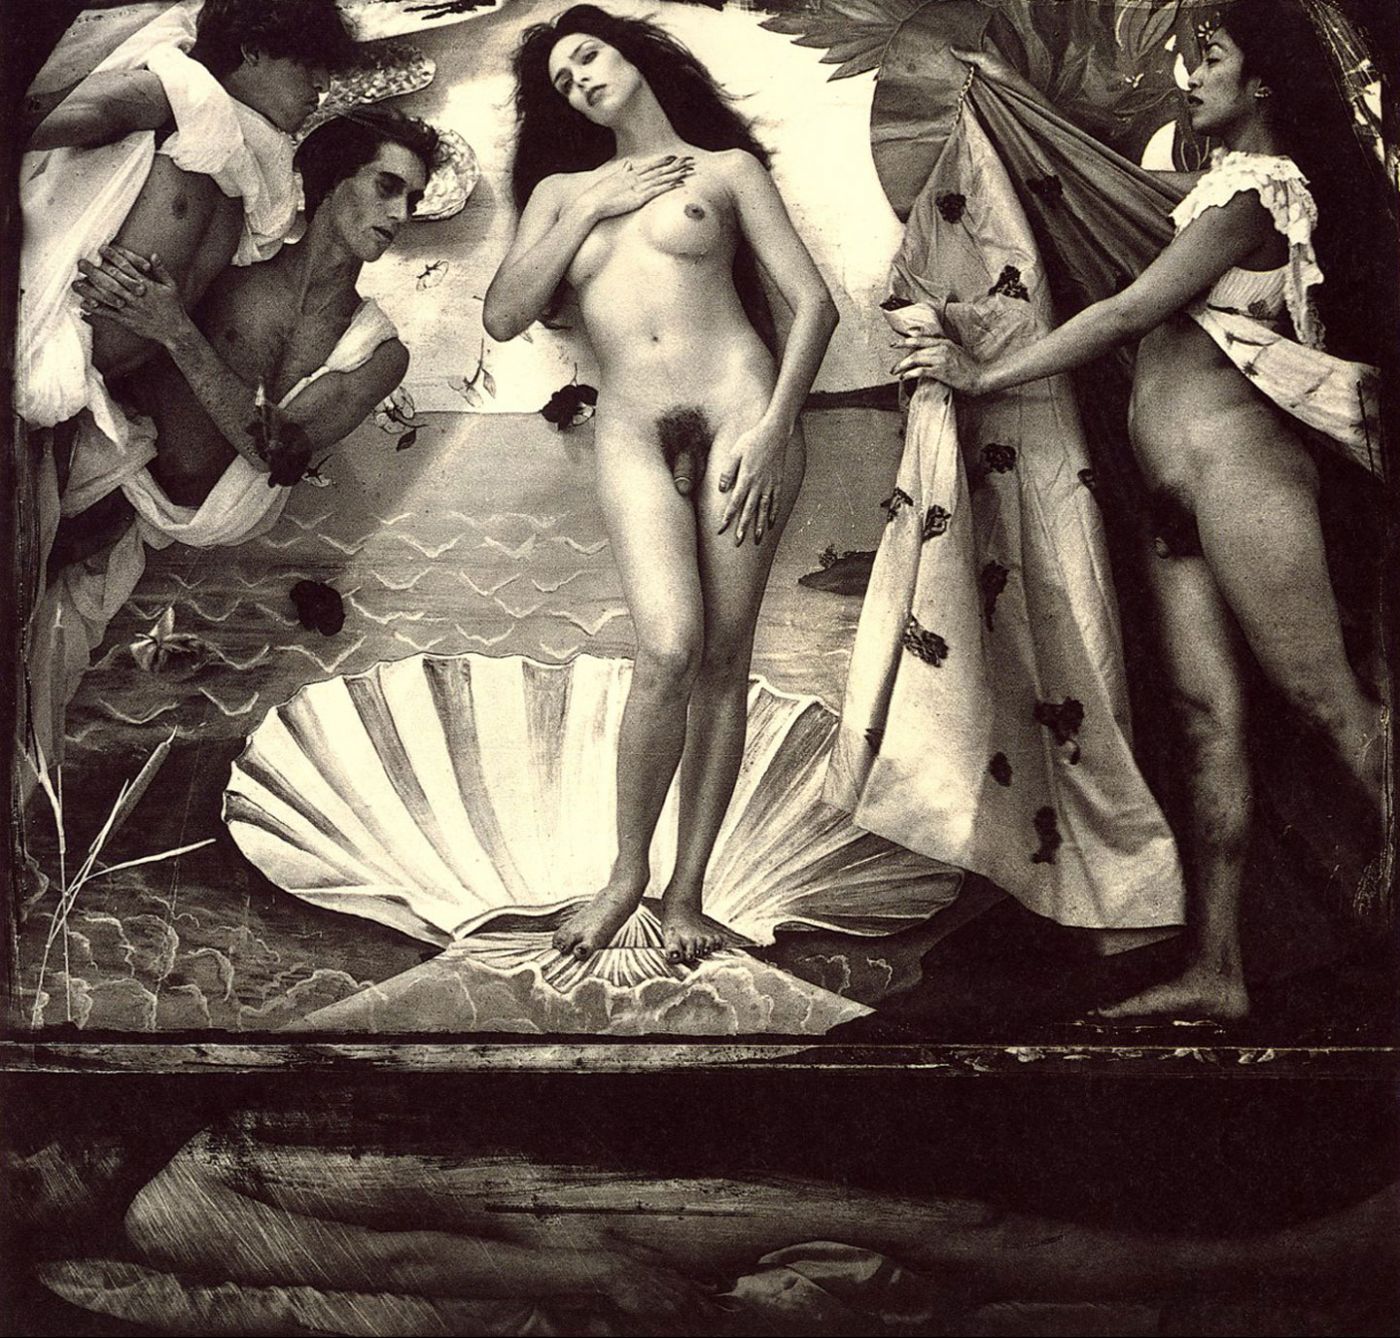 Joel-Peter Witkin: Gods of Earth and Heaven (Second Edition)